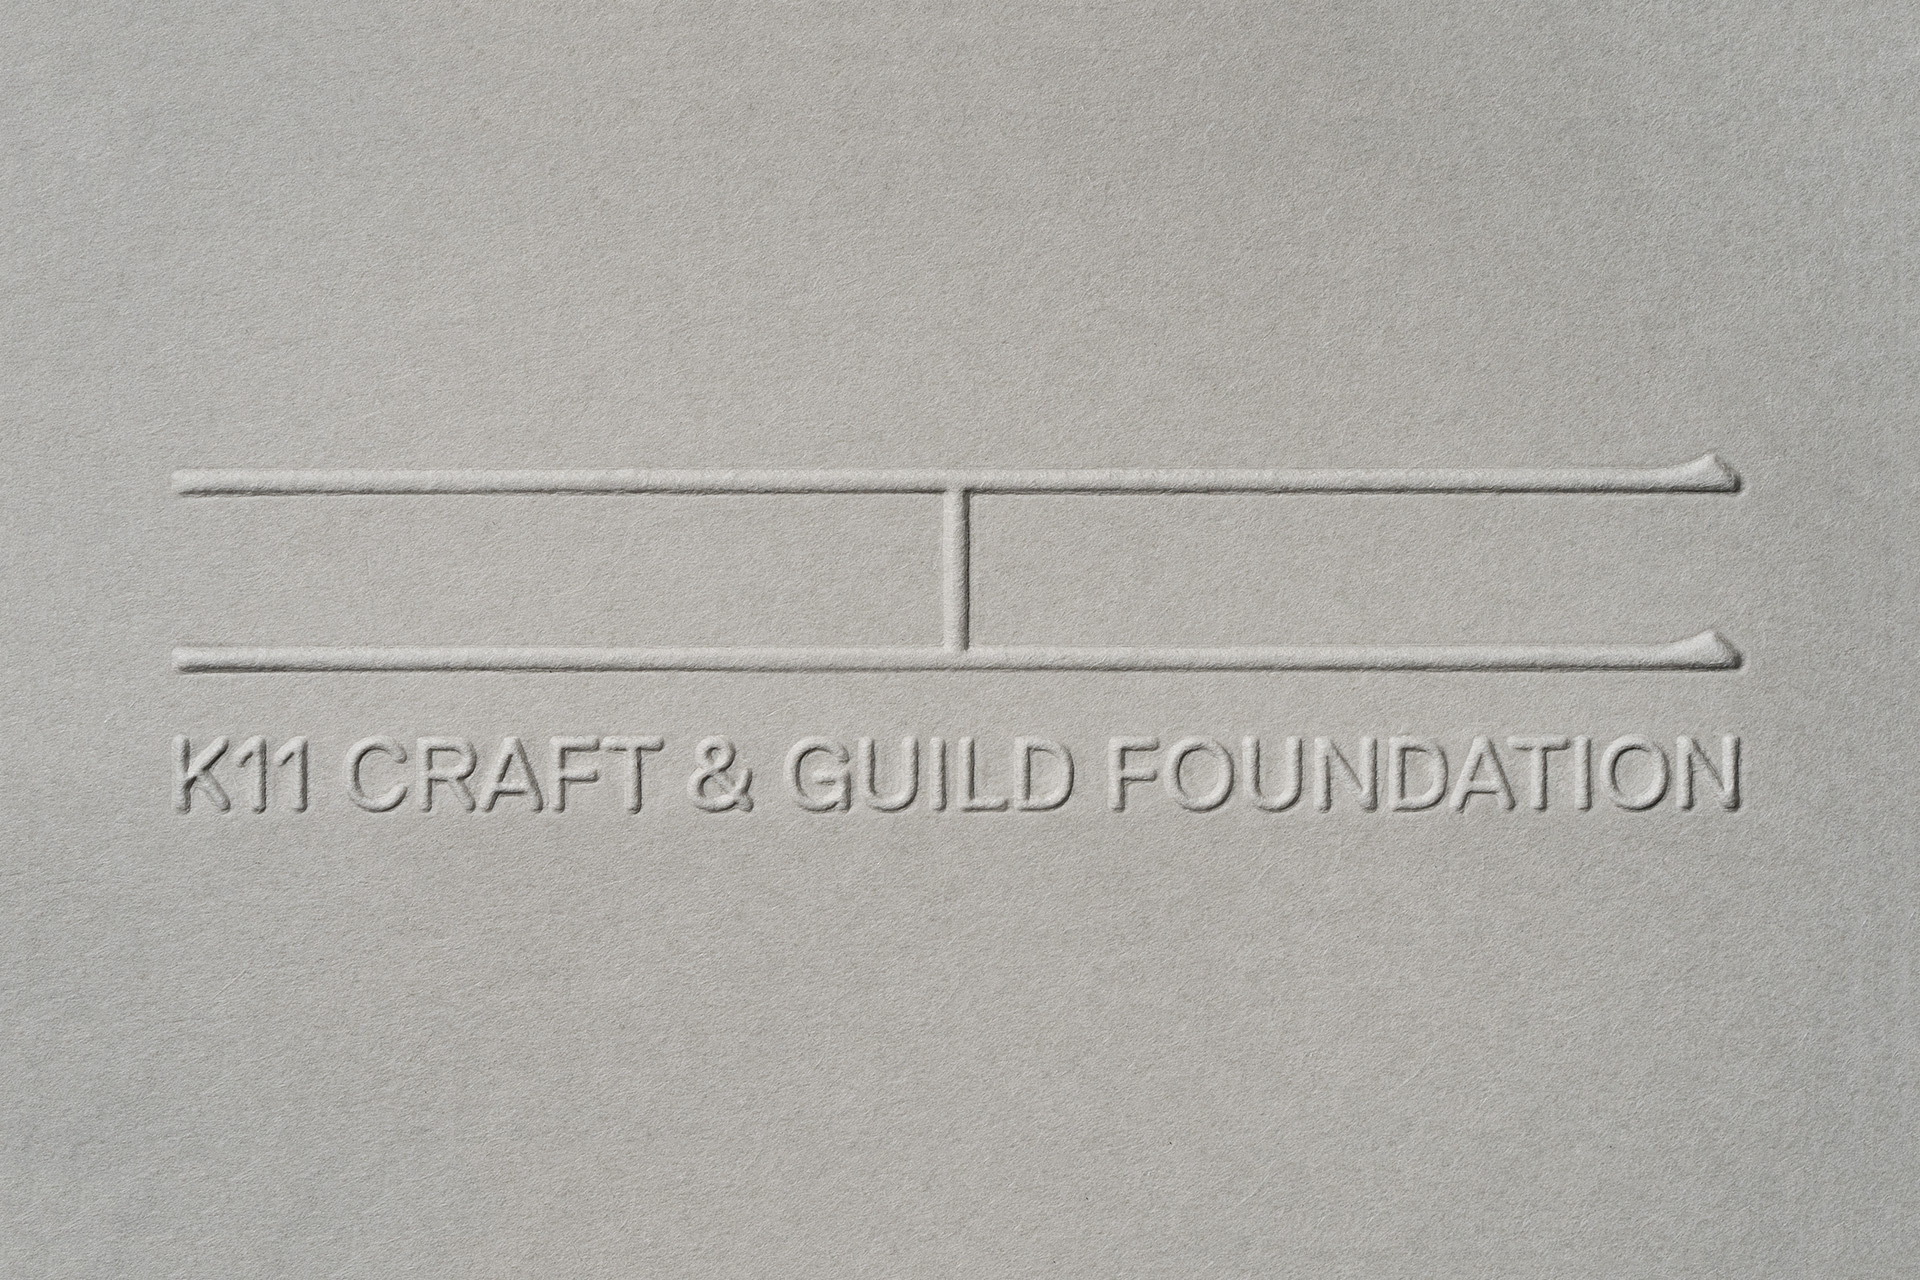 k11-craft-and-guild-foundation_03